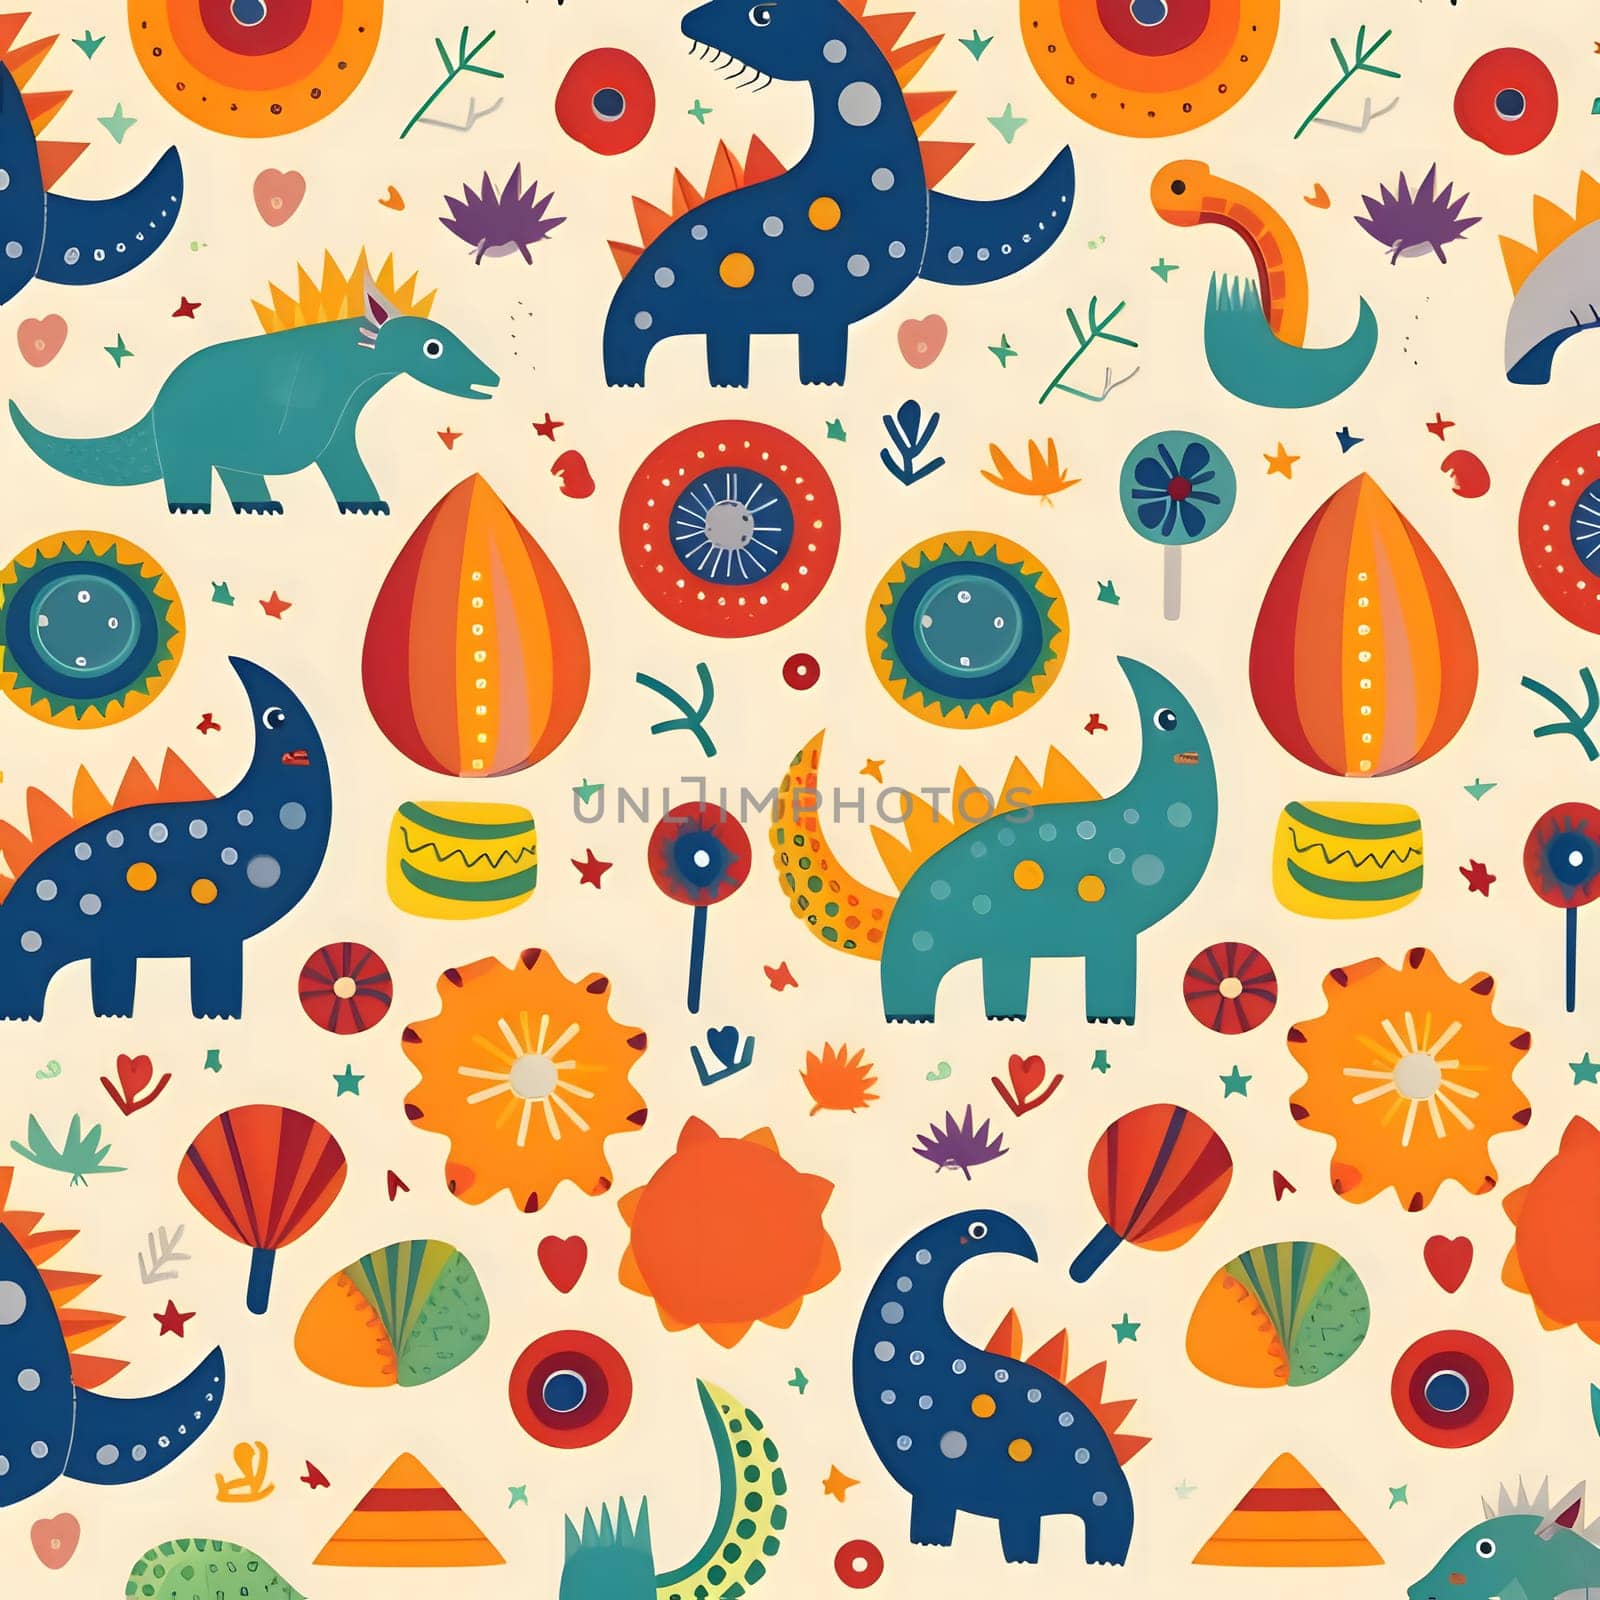 Patterns and banners backgrounds: Seamless pattern with cute dinosaurs. Vector illustration in flat style.